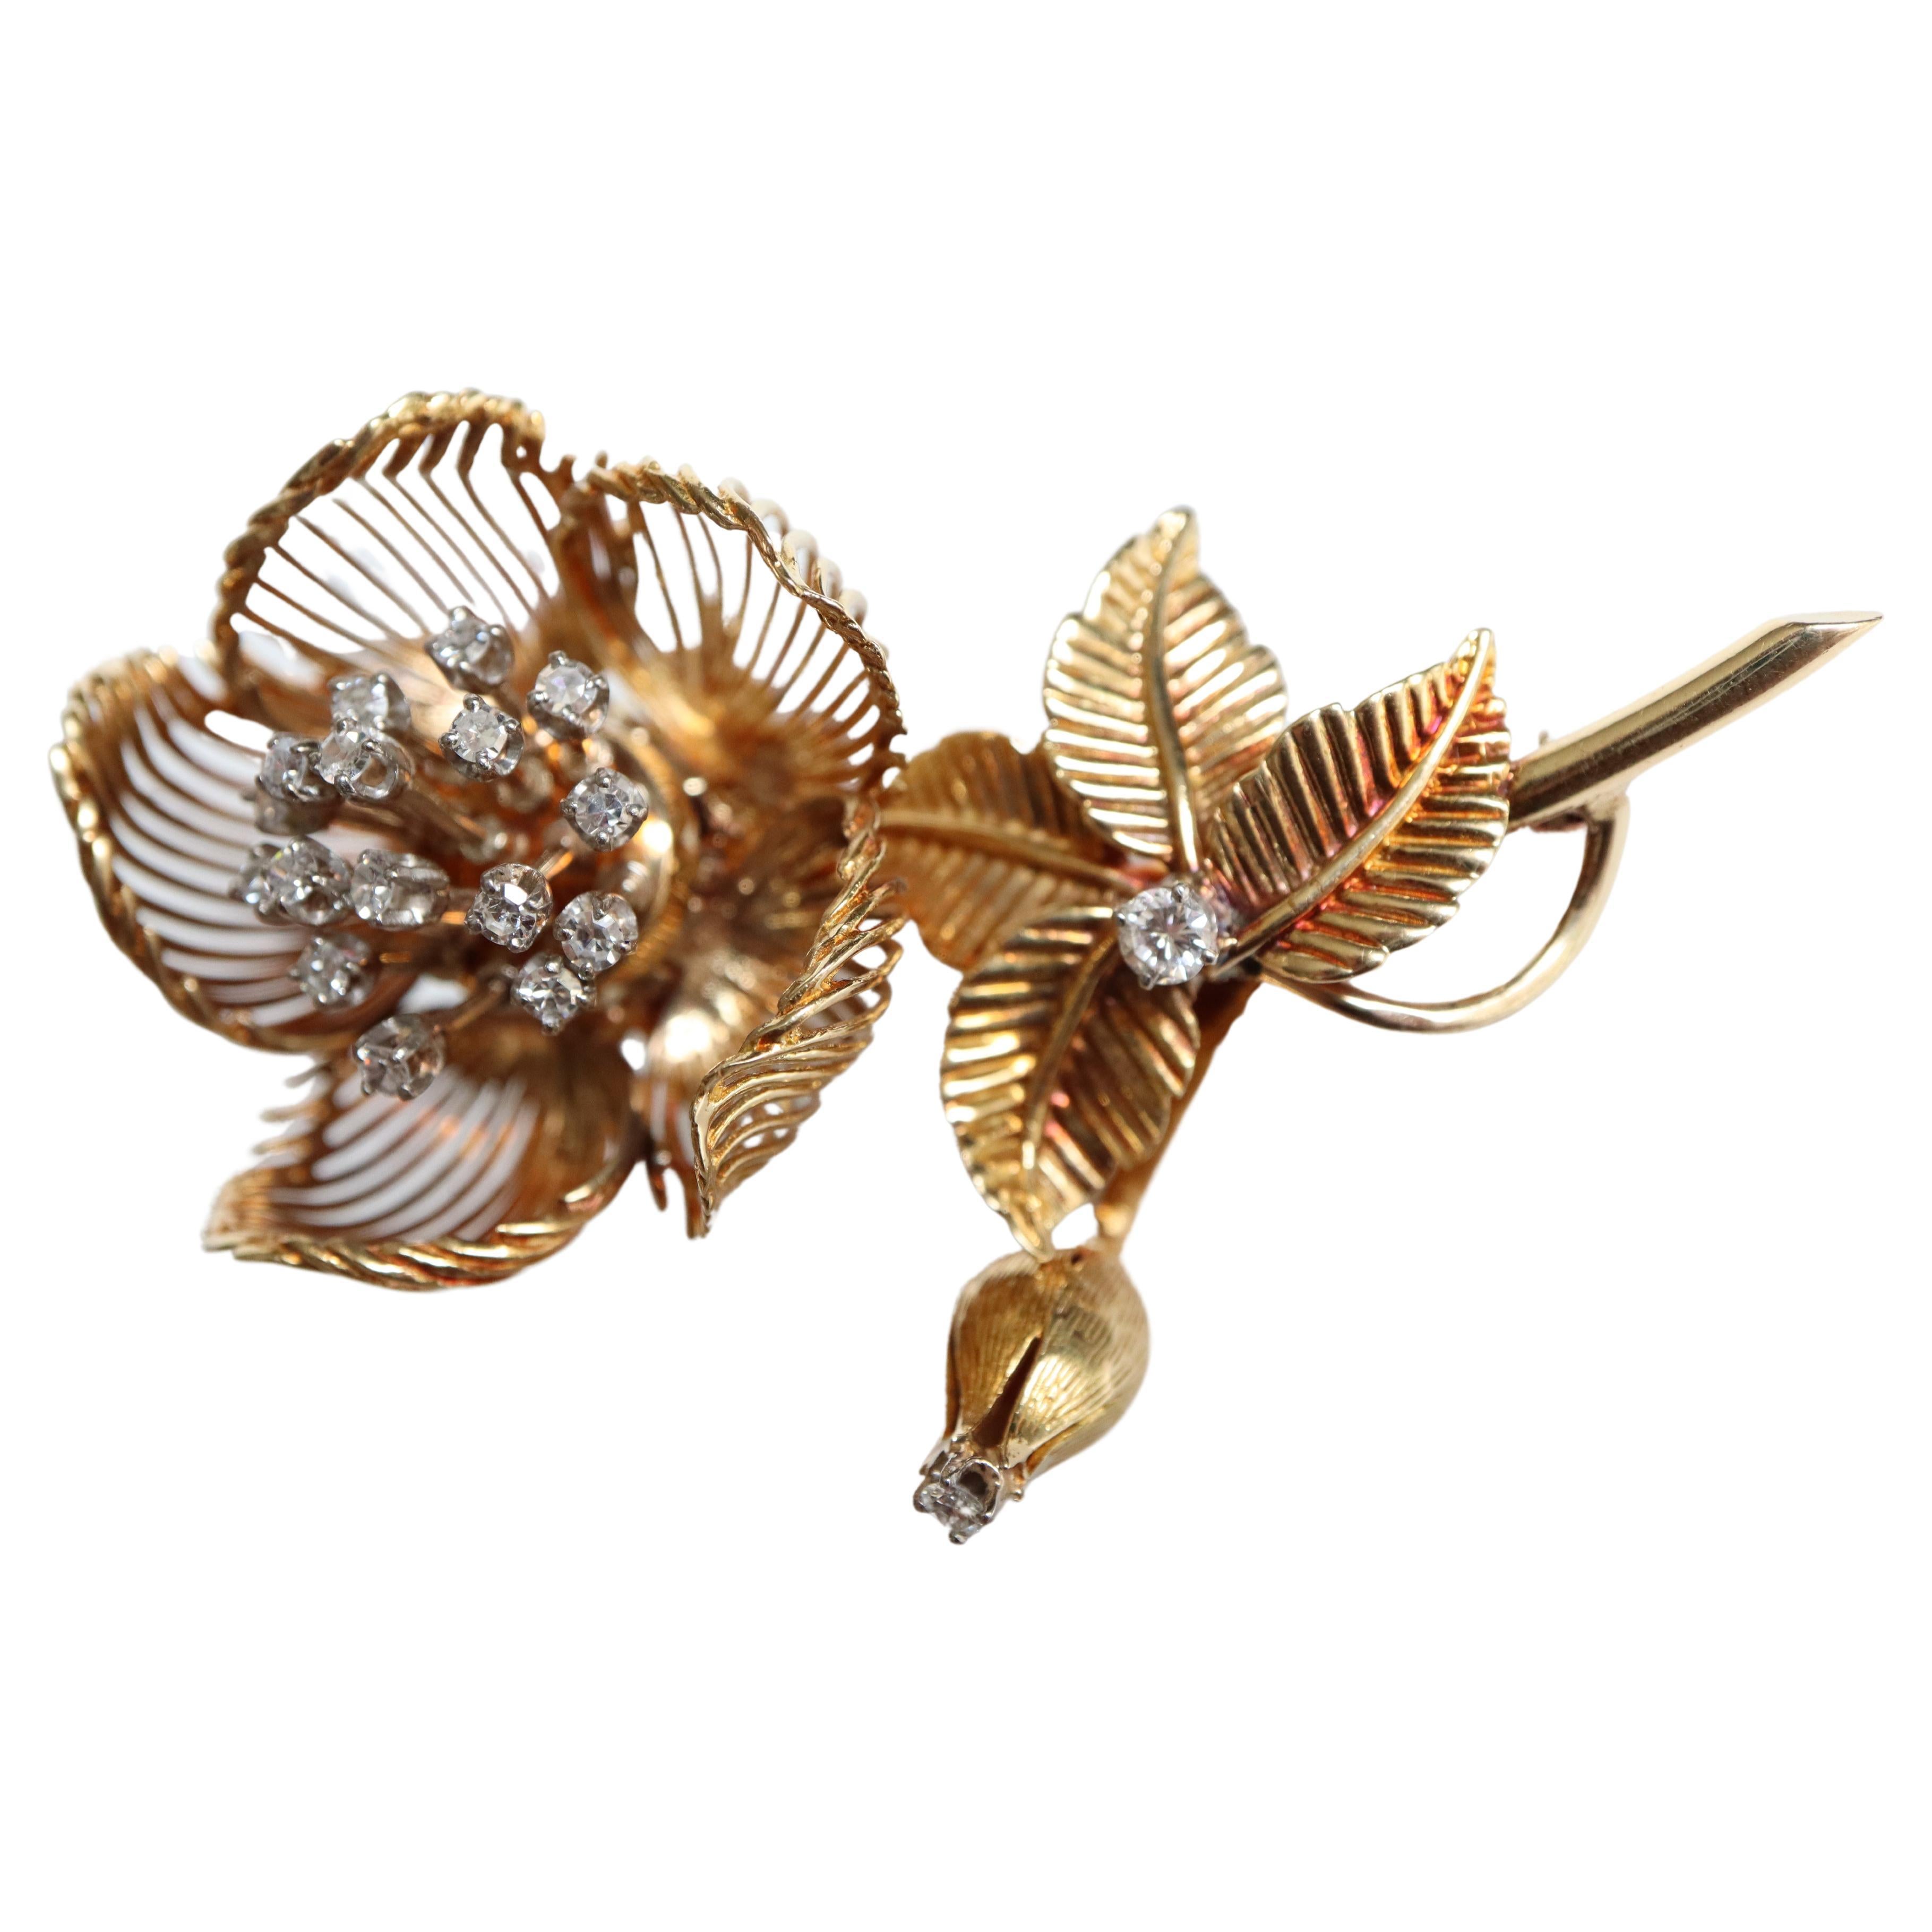 Antique brooch around 1950 Exceptional Articulated flower in 18 kt yellow gold representing a rose.
The pistil sets 16 diamonds in a claw setting in 18 carats white gold, the body in 18 carats yellow gold sets a diamond on the rosebud and a diamond